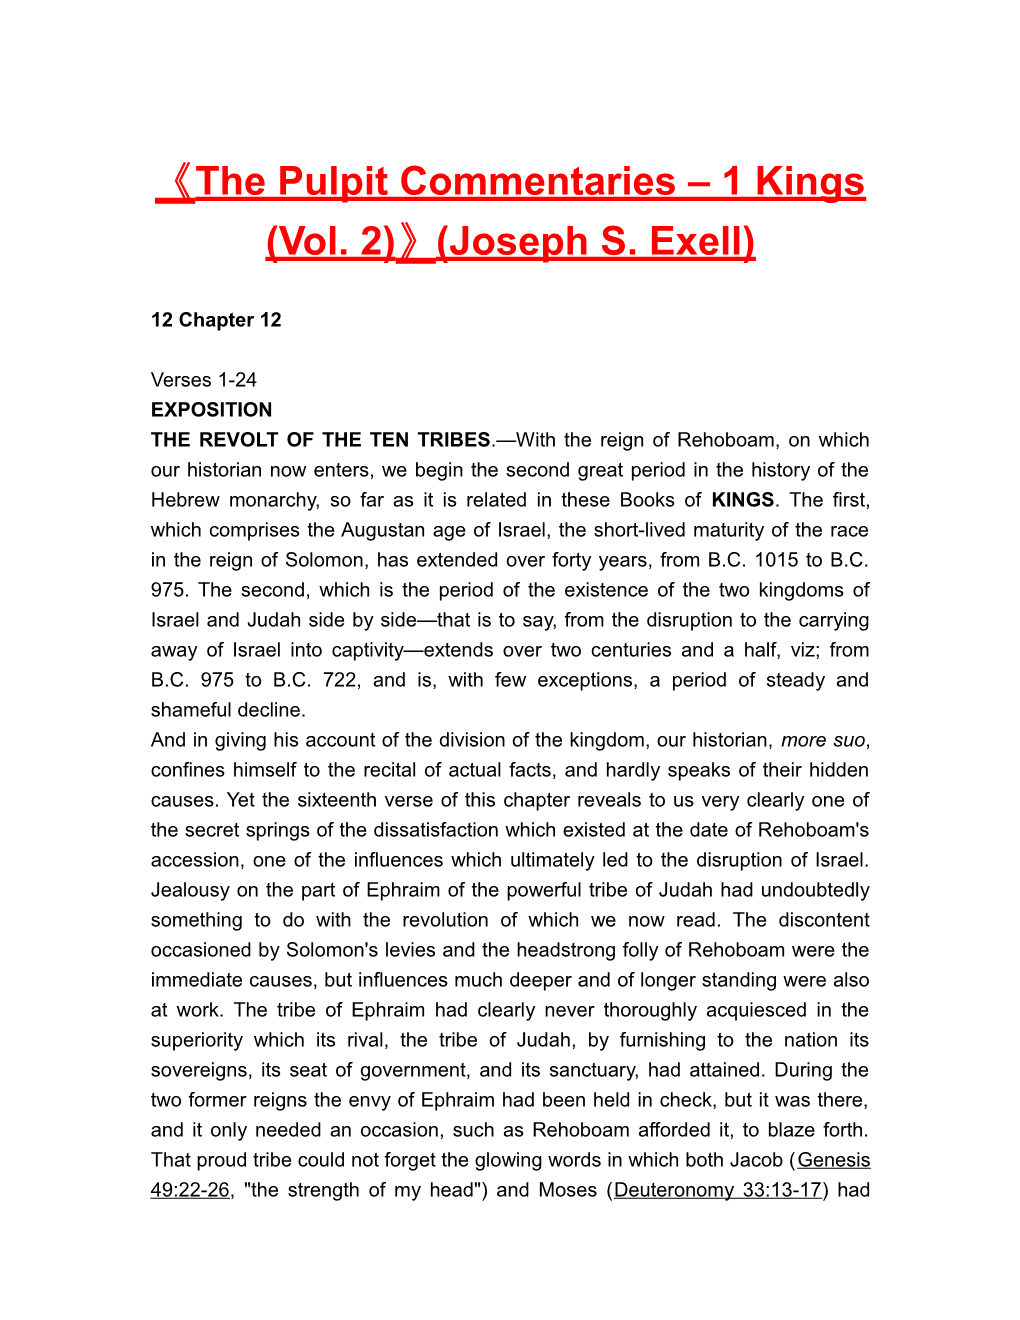 The Pulpit Commentaries 1 Kings (Vol. 2) (Joseph S. Exell)